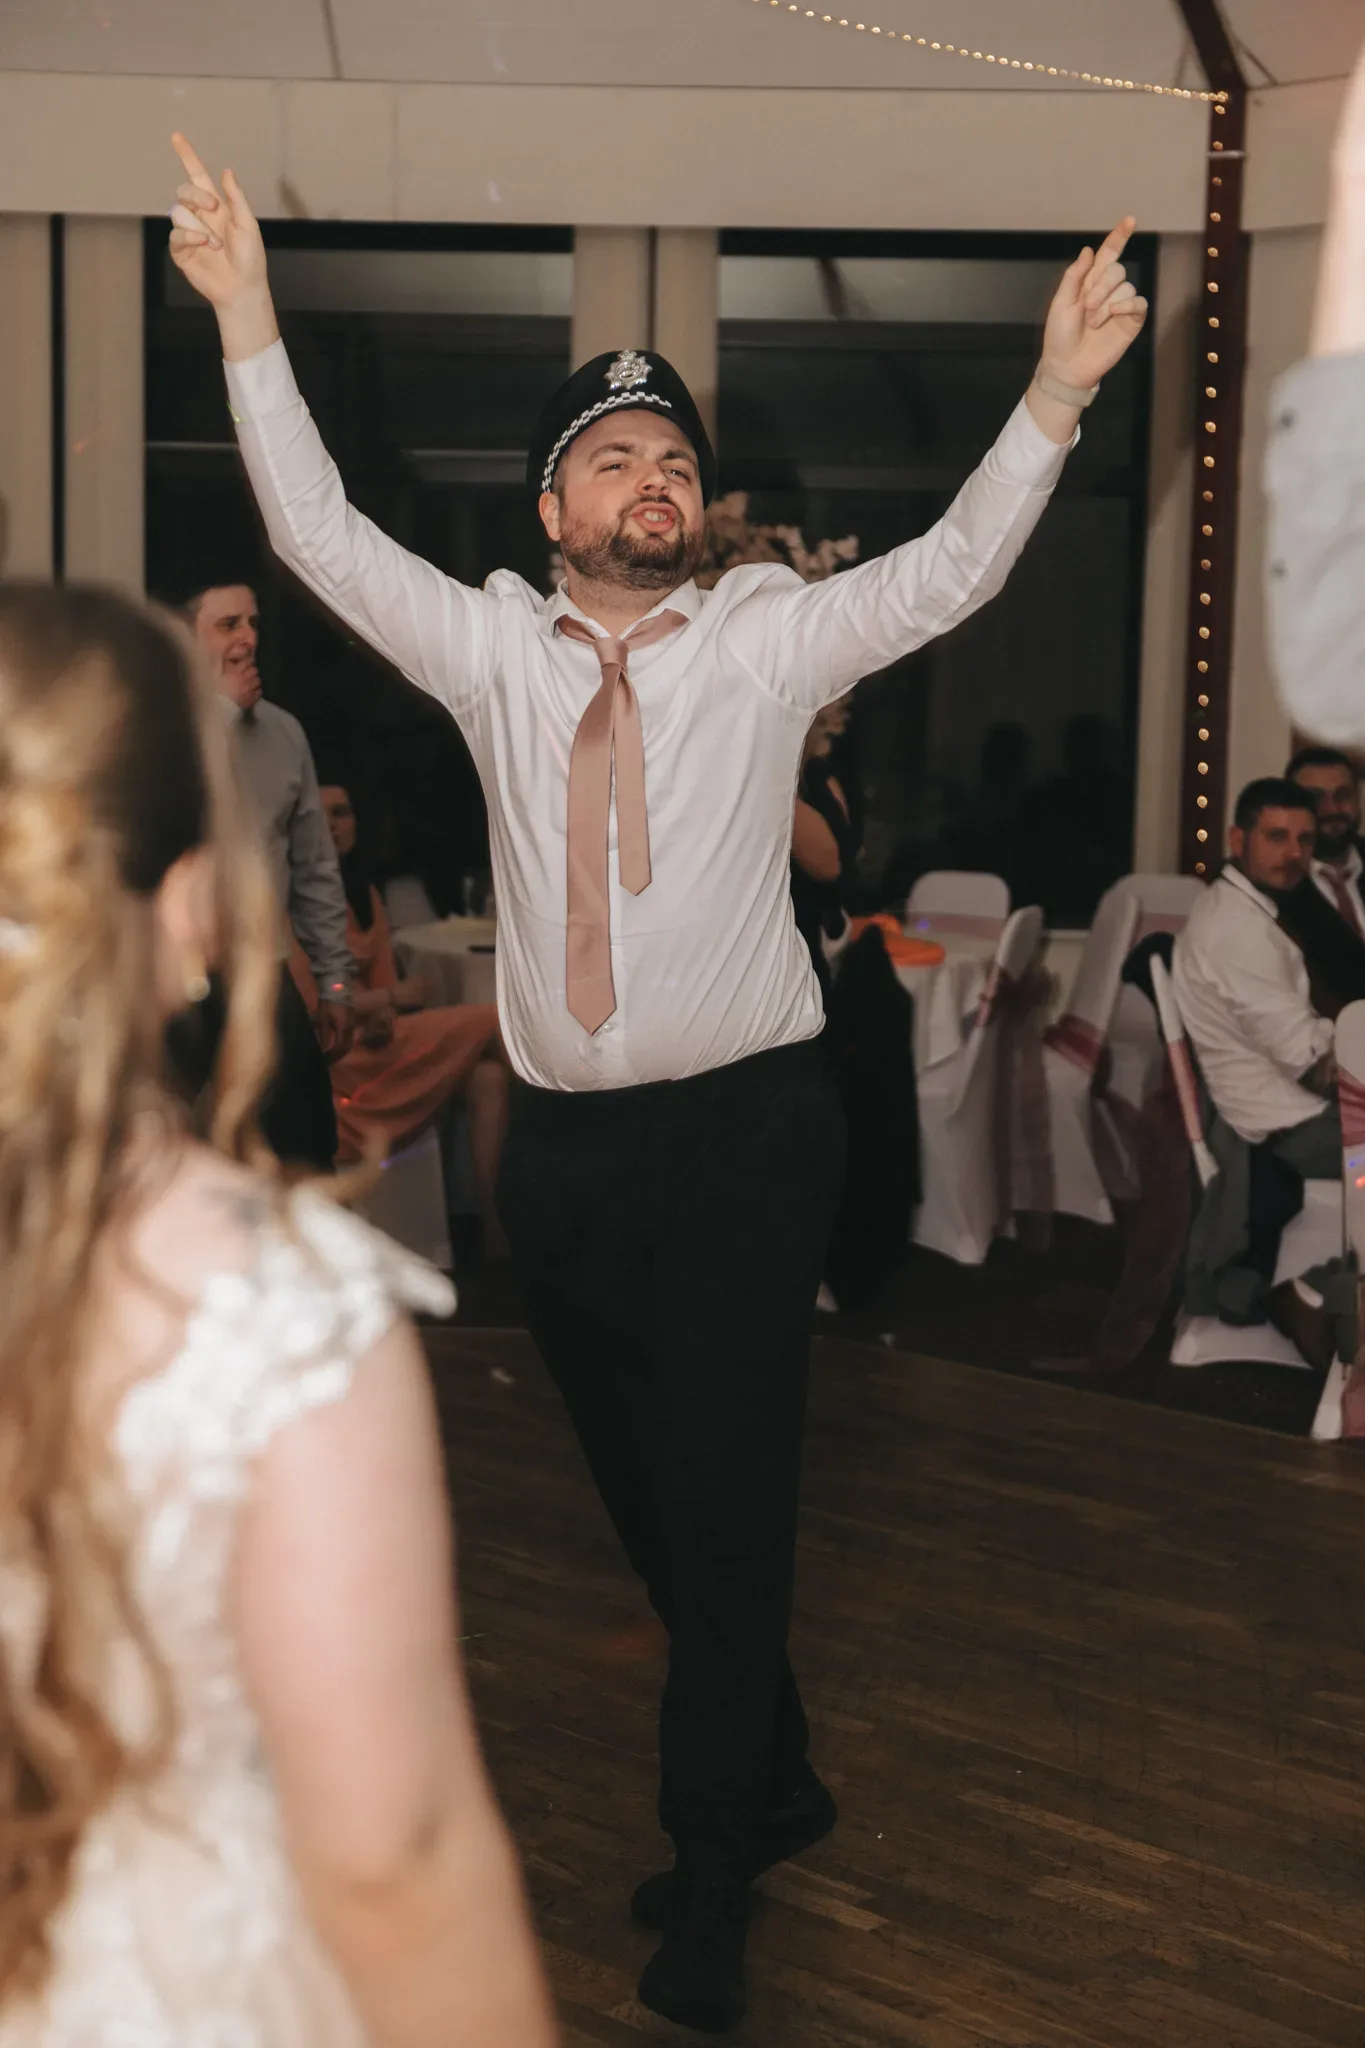 A man at a wedding reception, dressed in a formal shirt and tie, joyfully dances with his arms raised. guests seated around him are watching and smiling, creating a festive atmosphere.